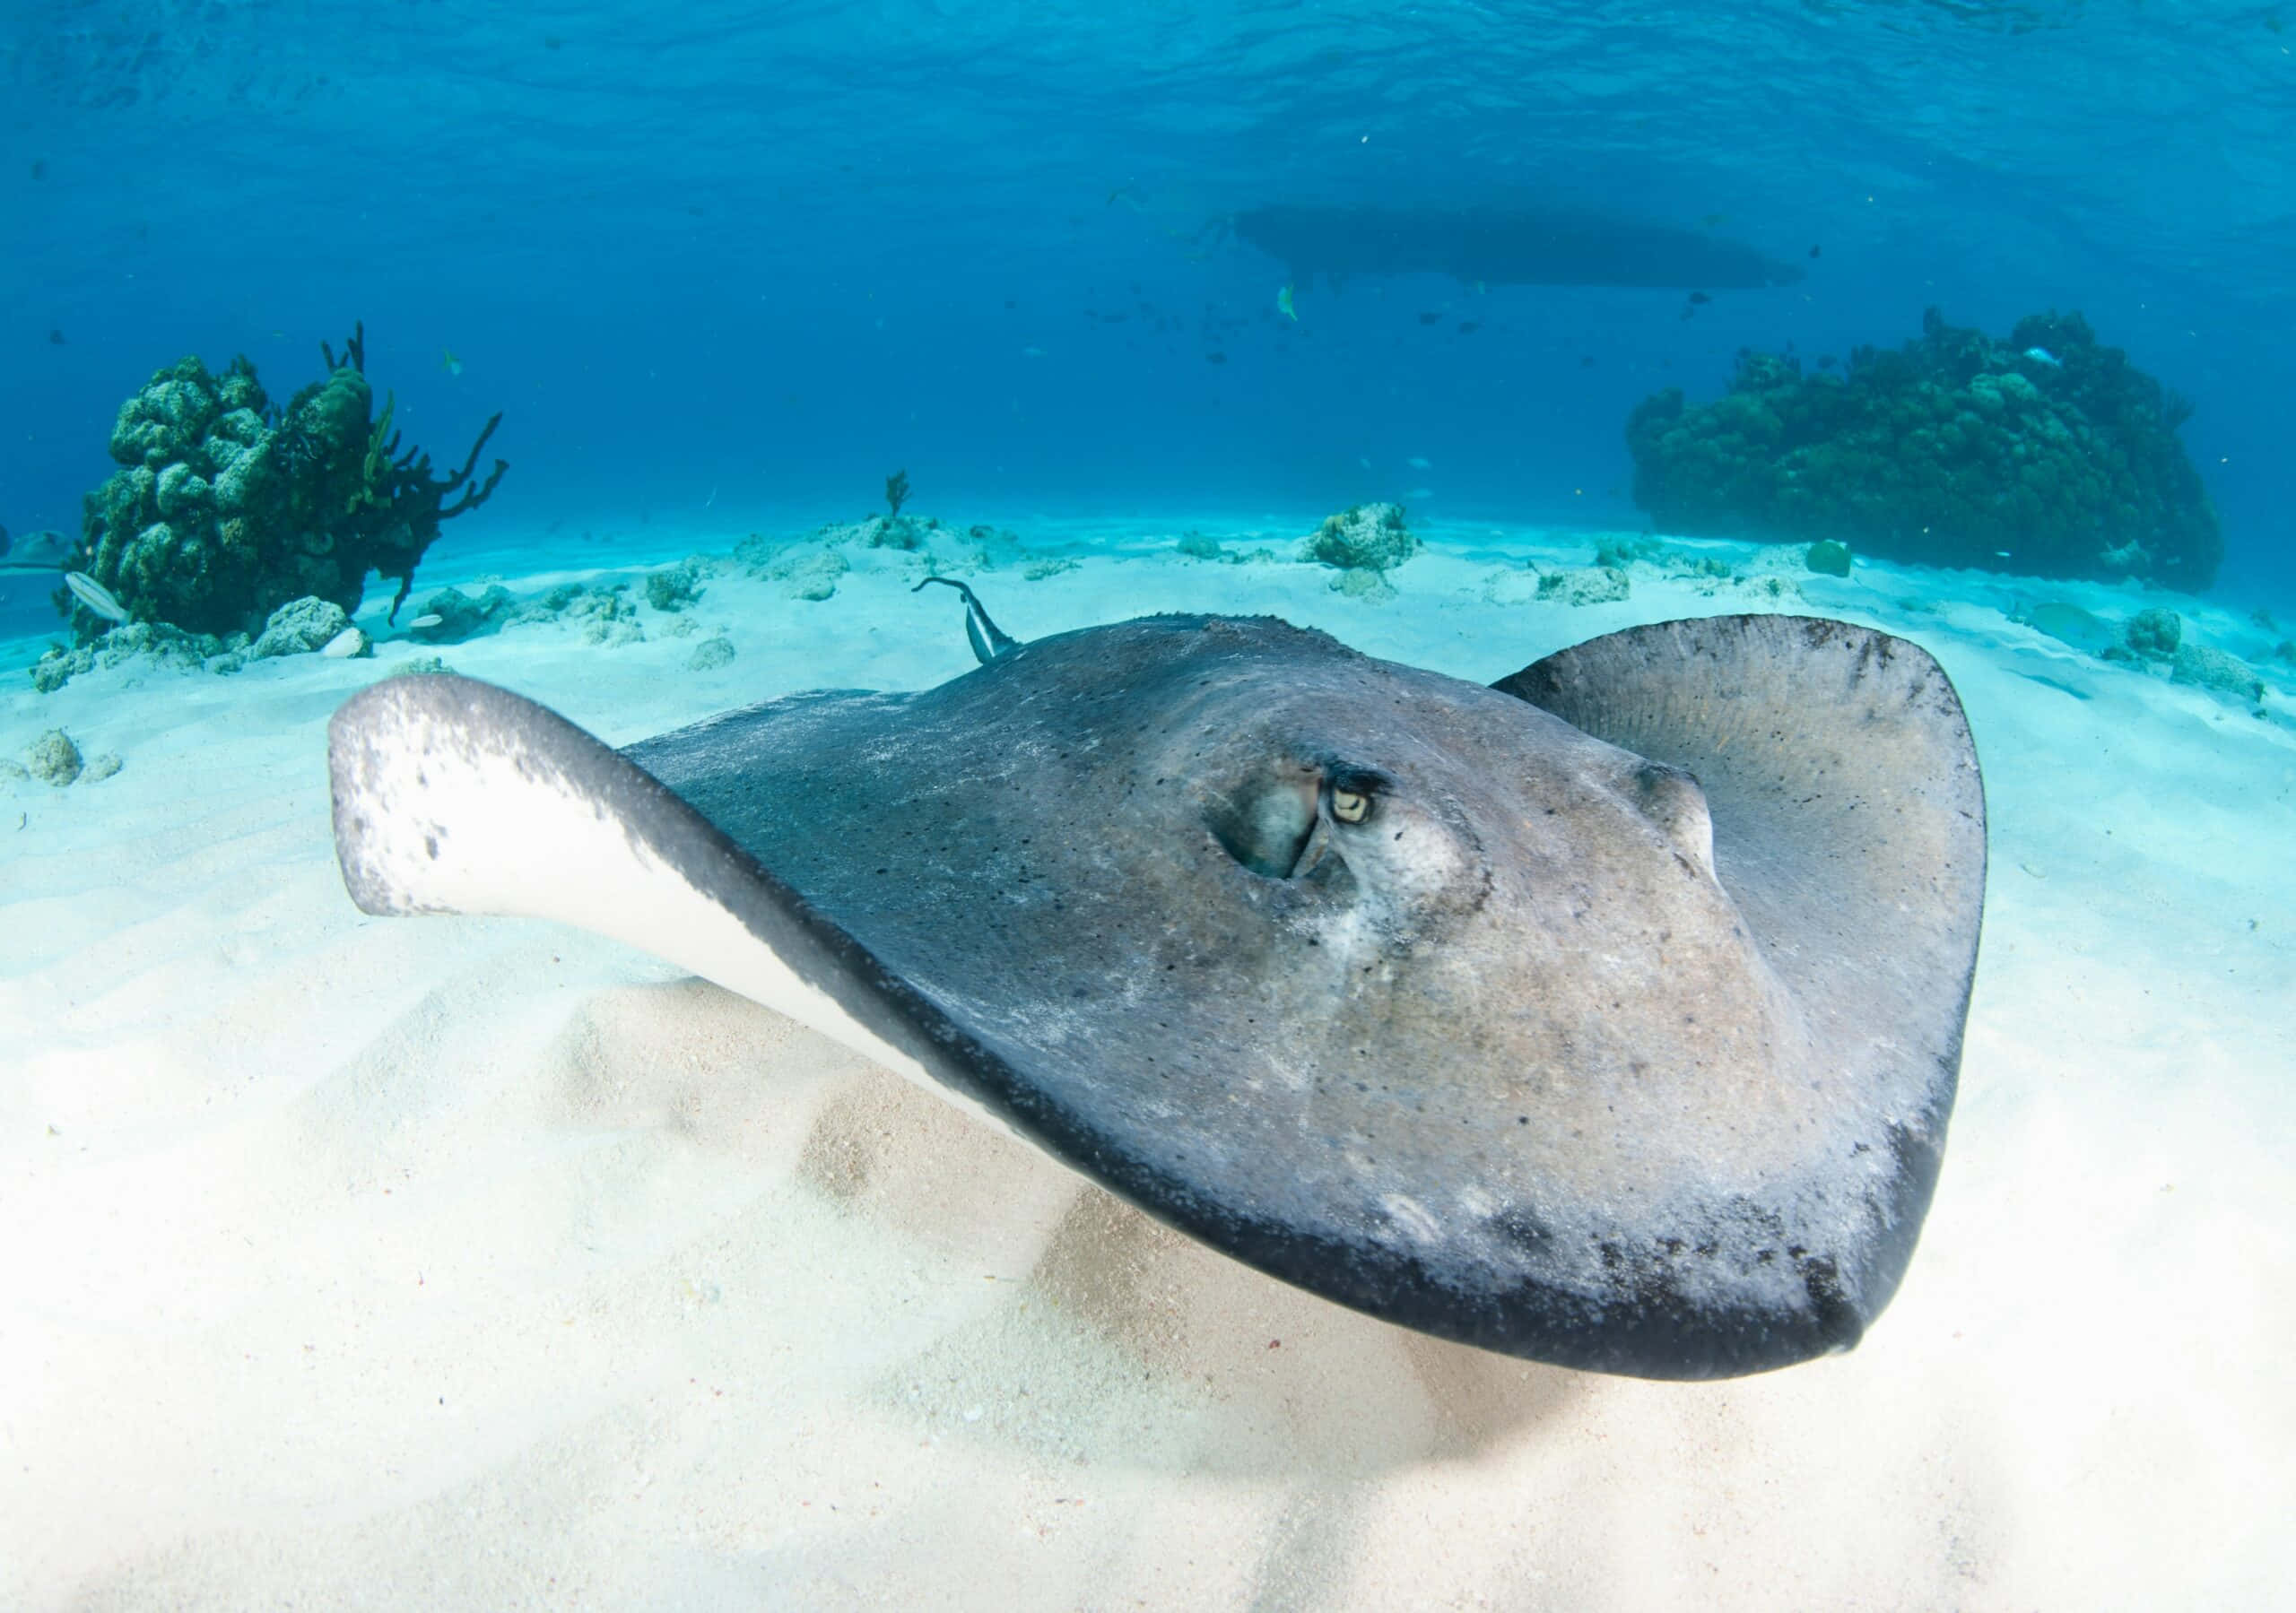 Captivating Underwater Scene With A Tranquil Stingray Wallpaper